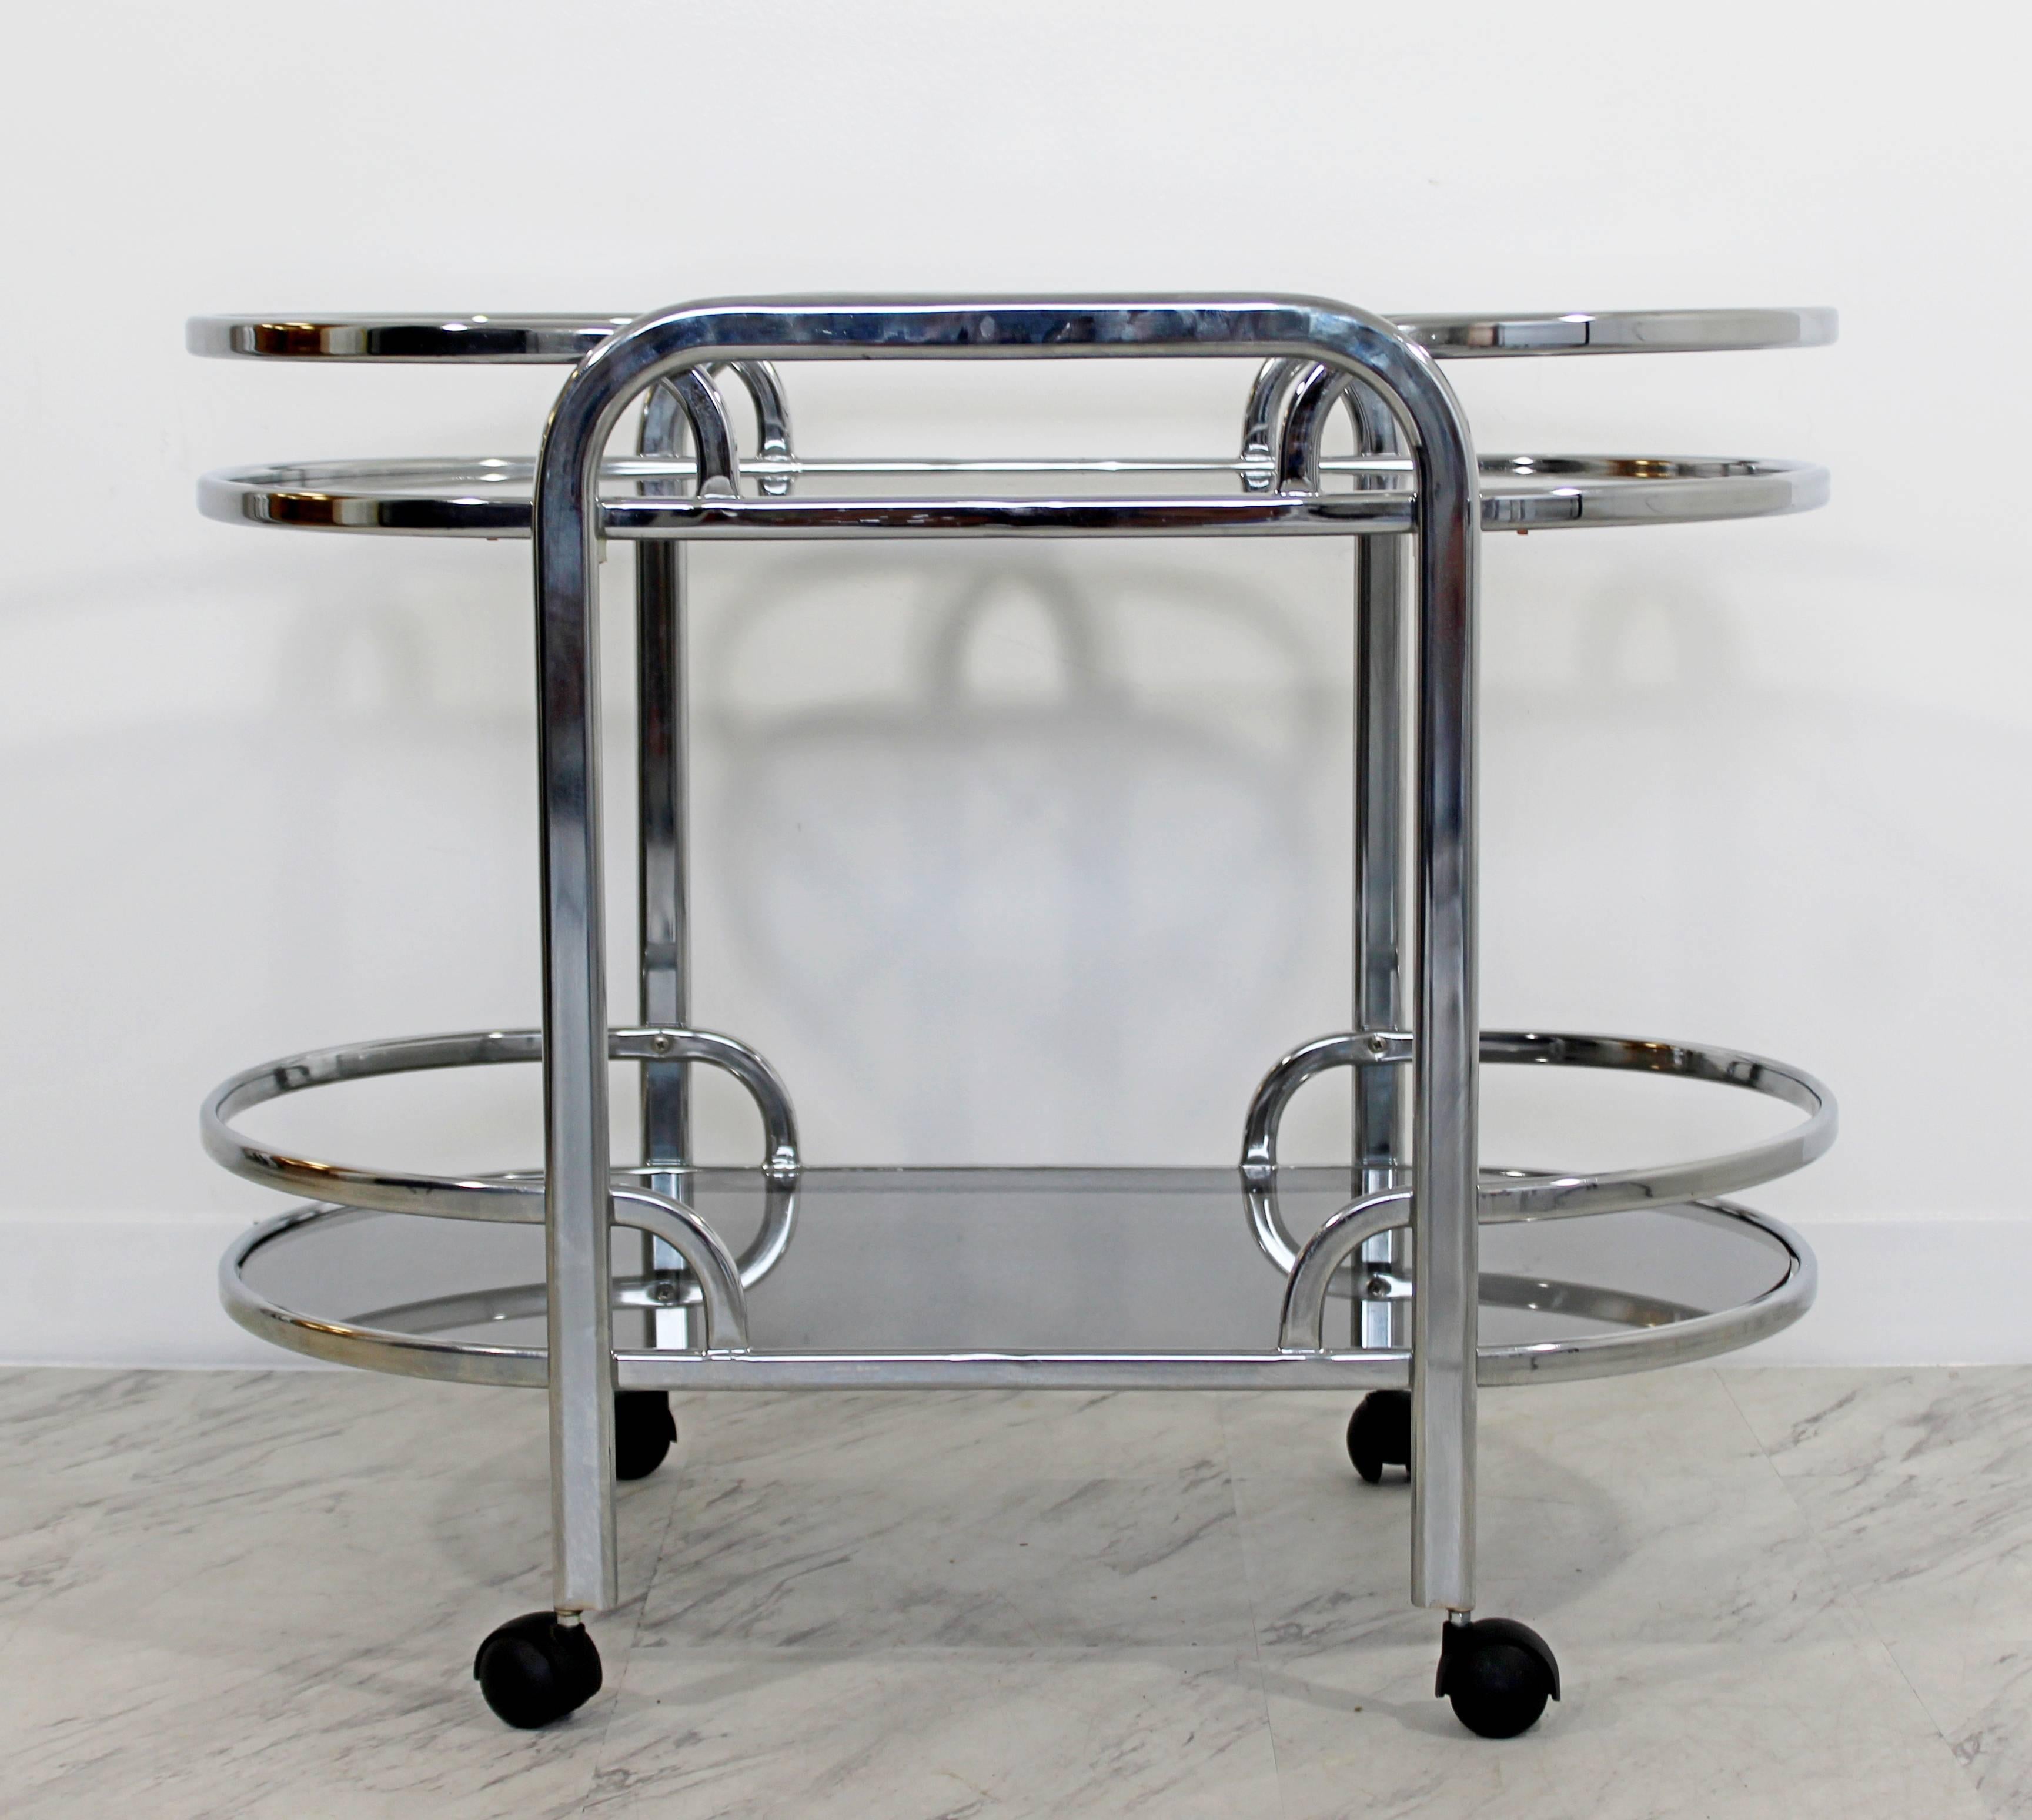 For your consideration is a fabulous, chrome and smoked glass, two-tiered bar or serving cart on casters, with a removable tray table, designed by Milo Baughman for the Design Institute of America, circa the 1970s. In excellent condition. The